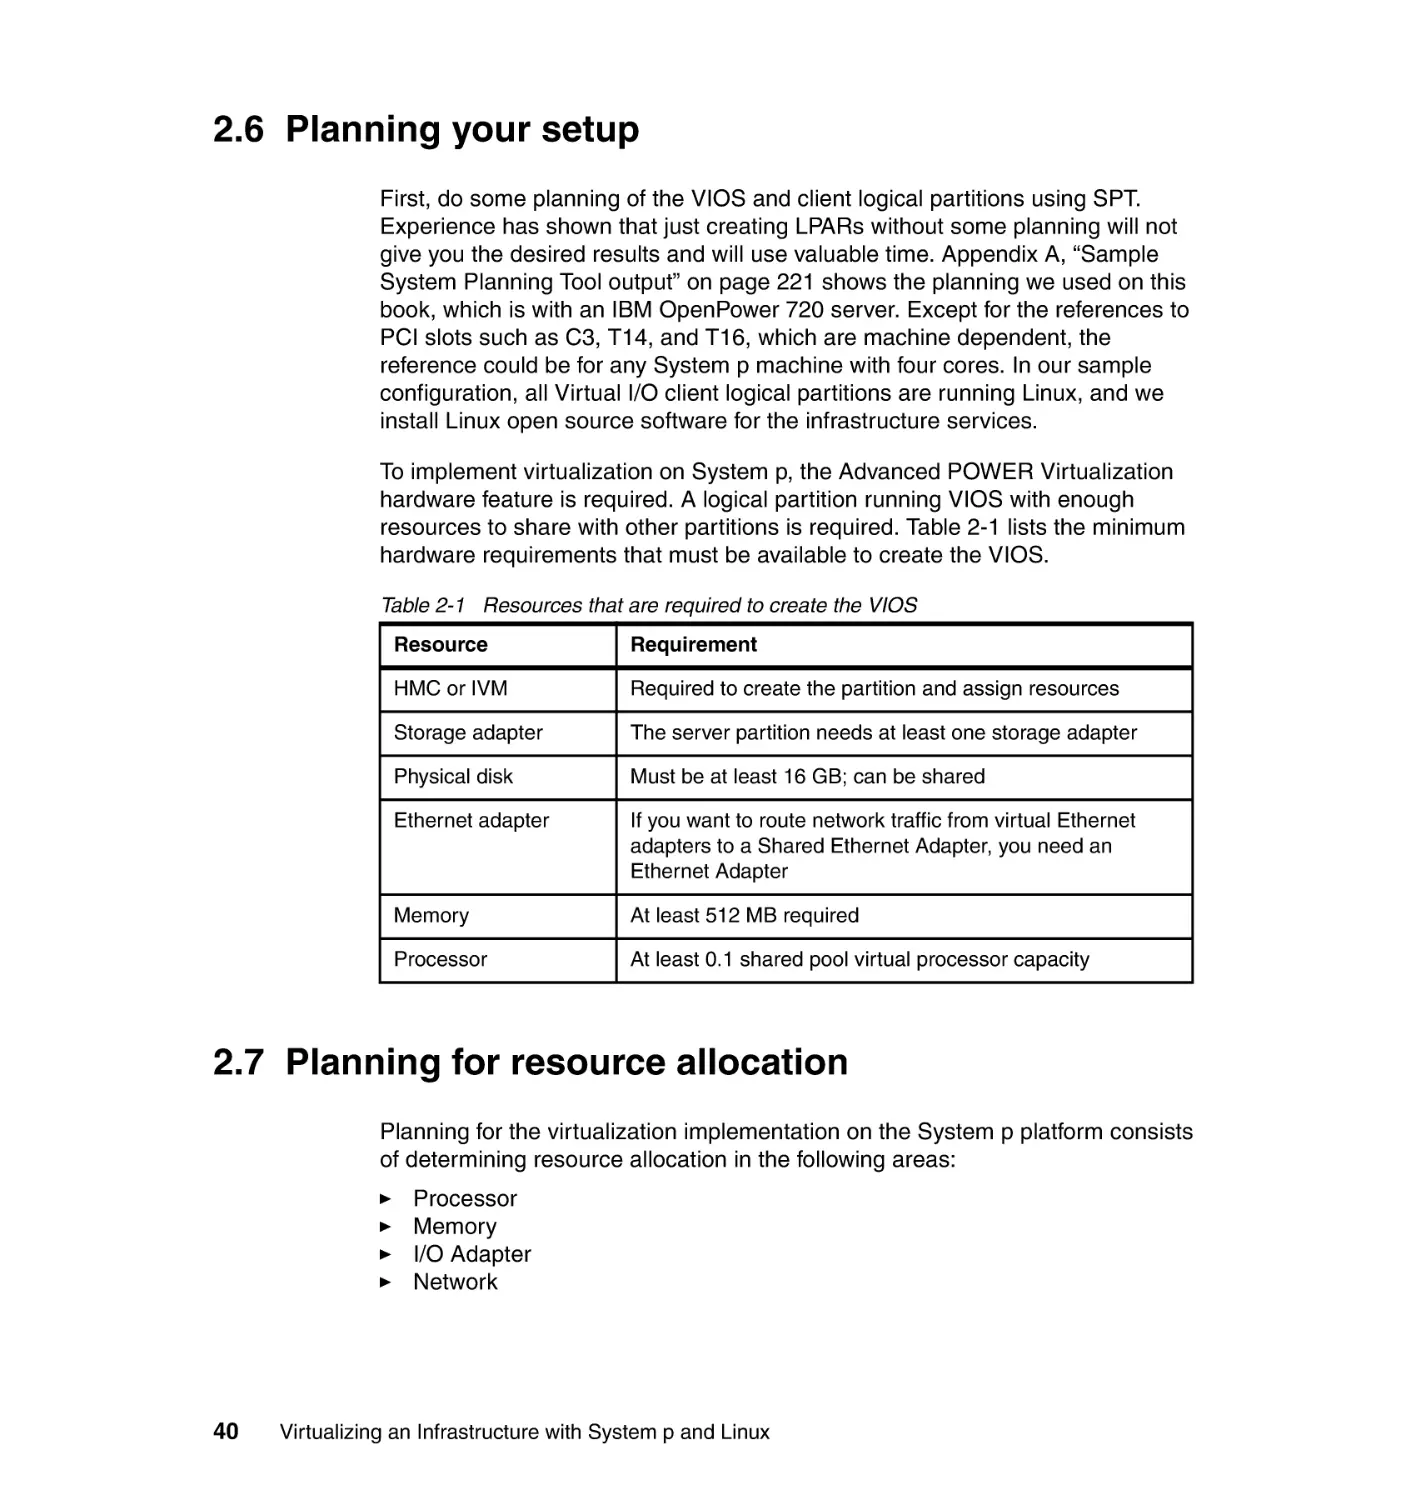 2.6 Planning your setup
2.7 Planning for resource allocation